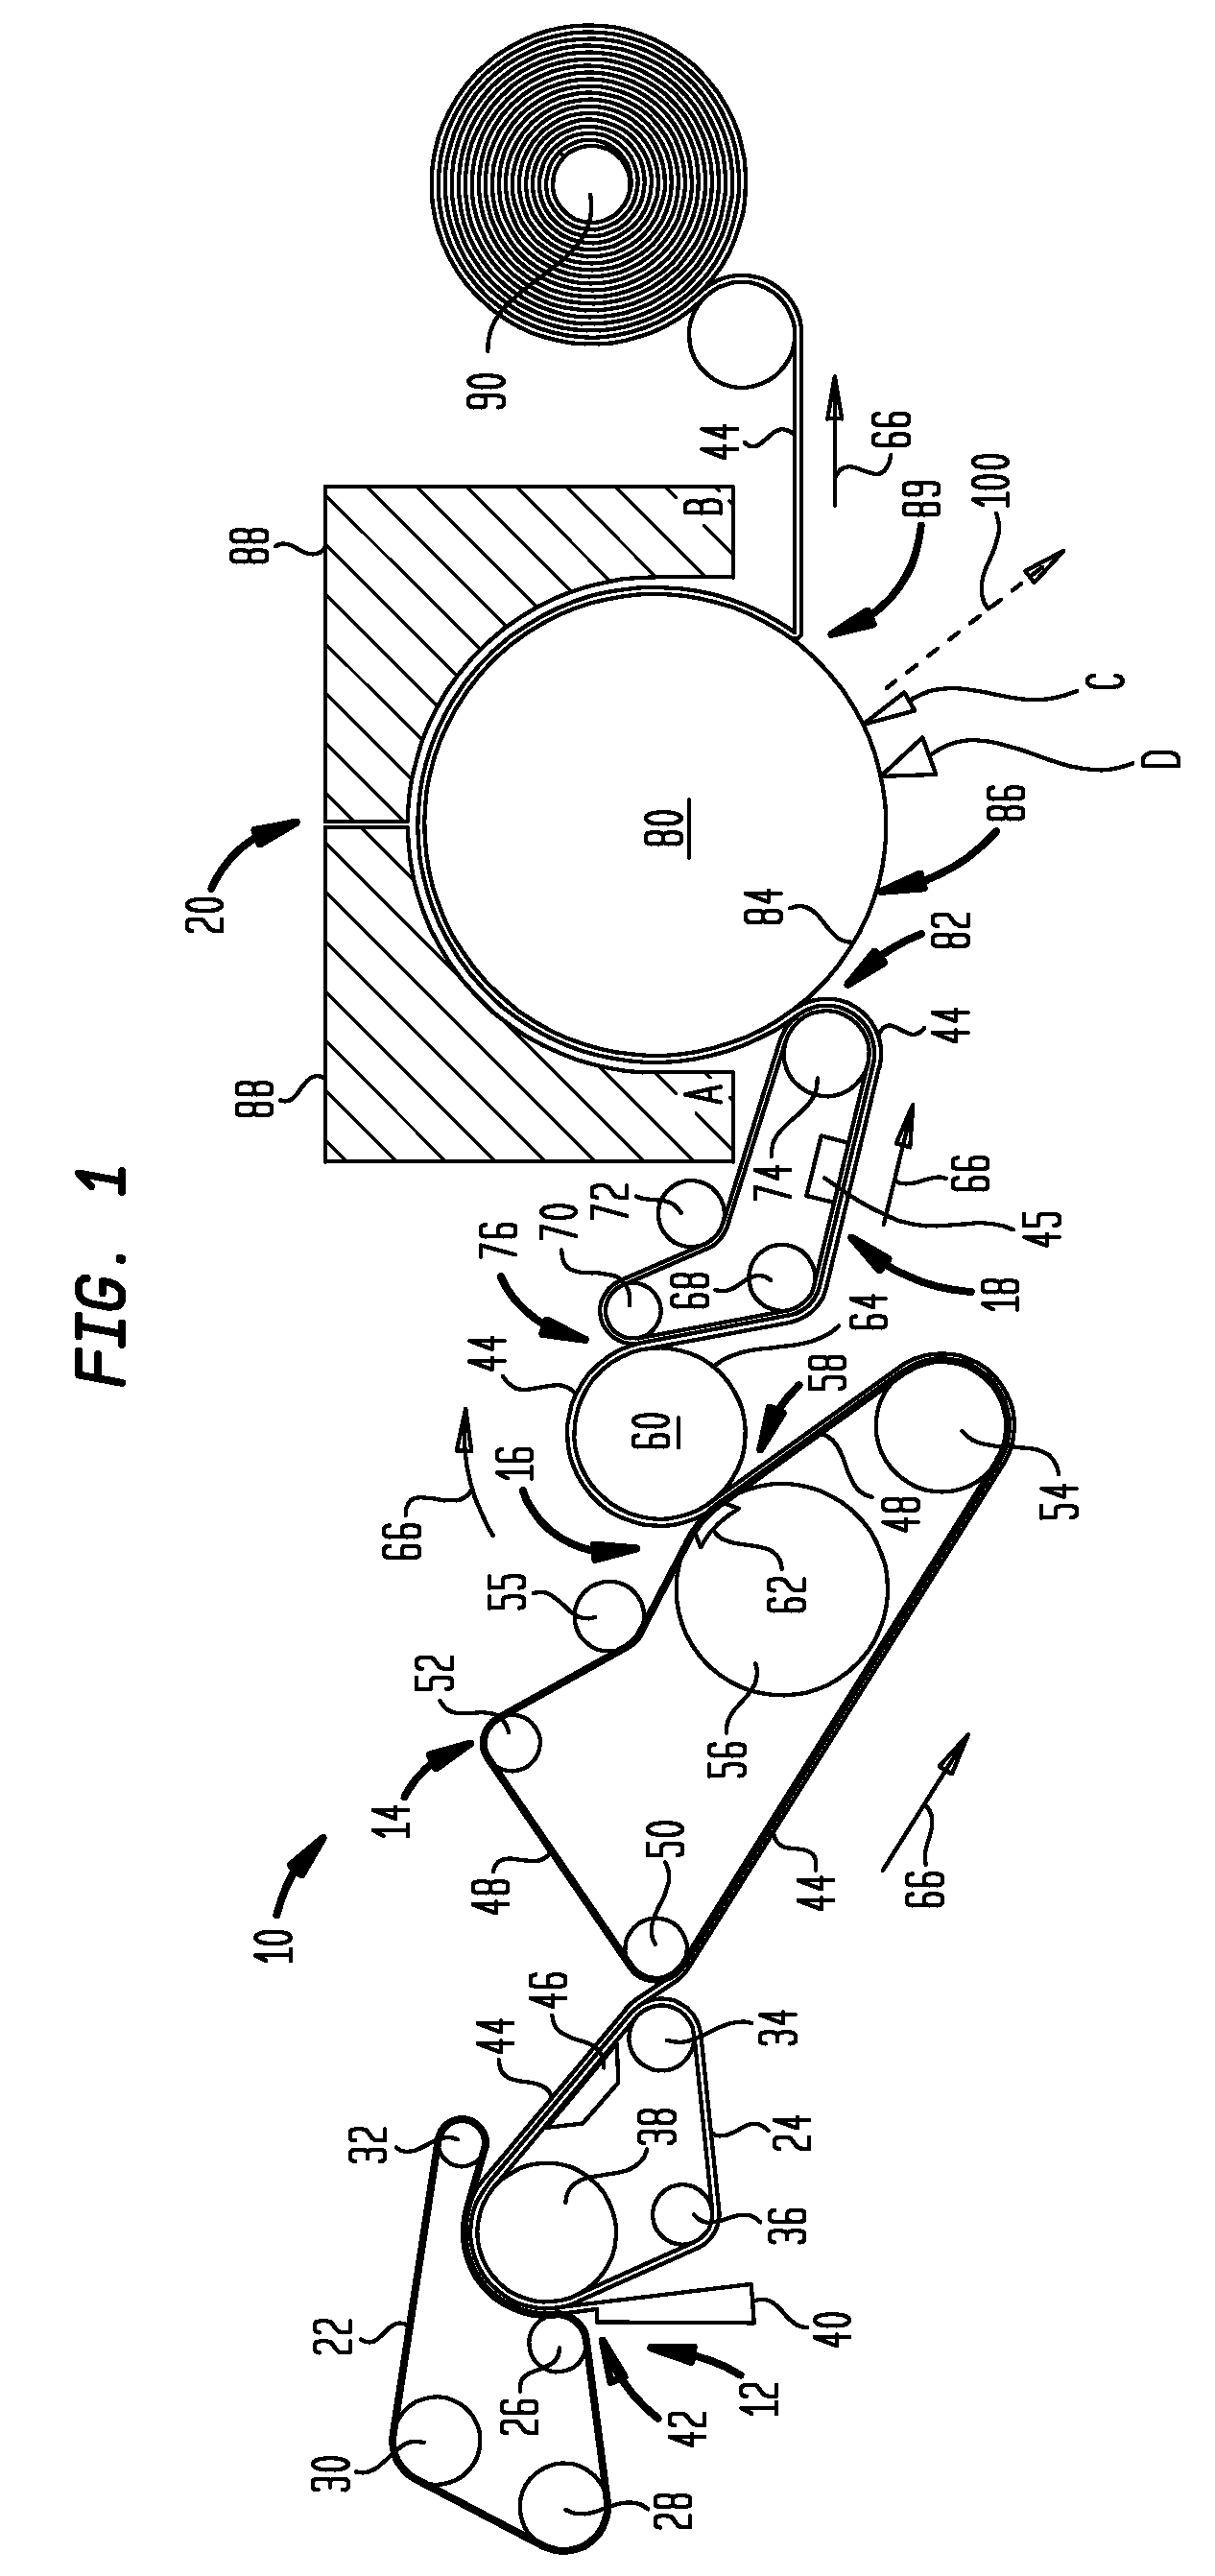 Method Of Controlling Adhesive Build-Up On A Yankee Dryer